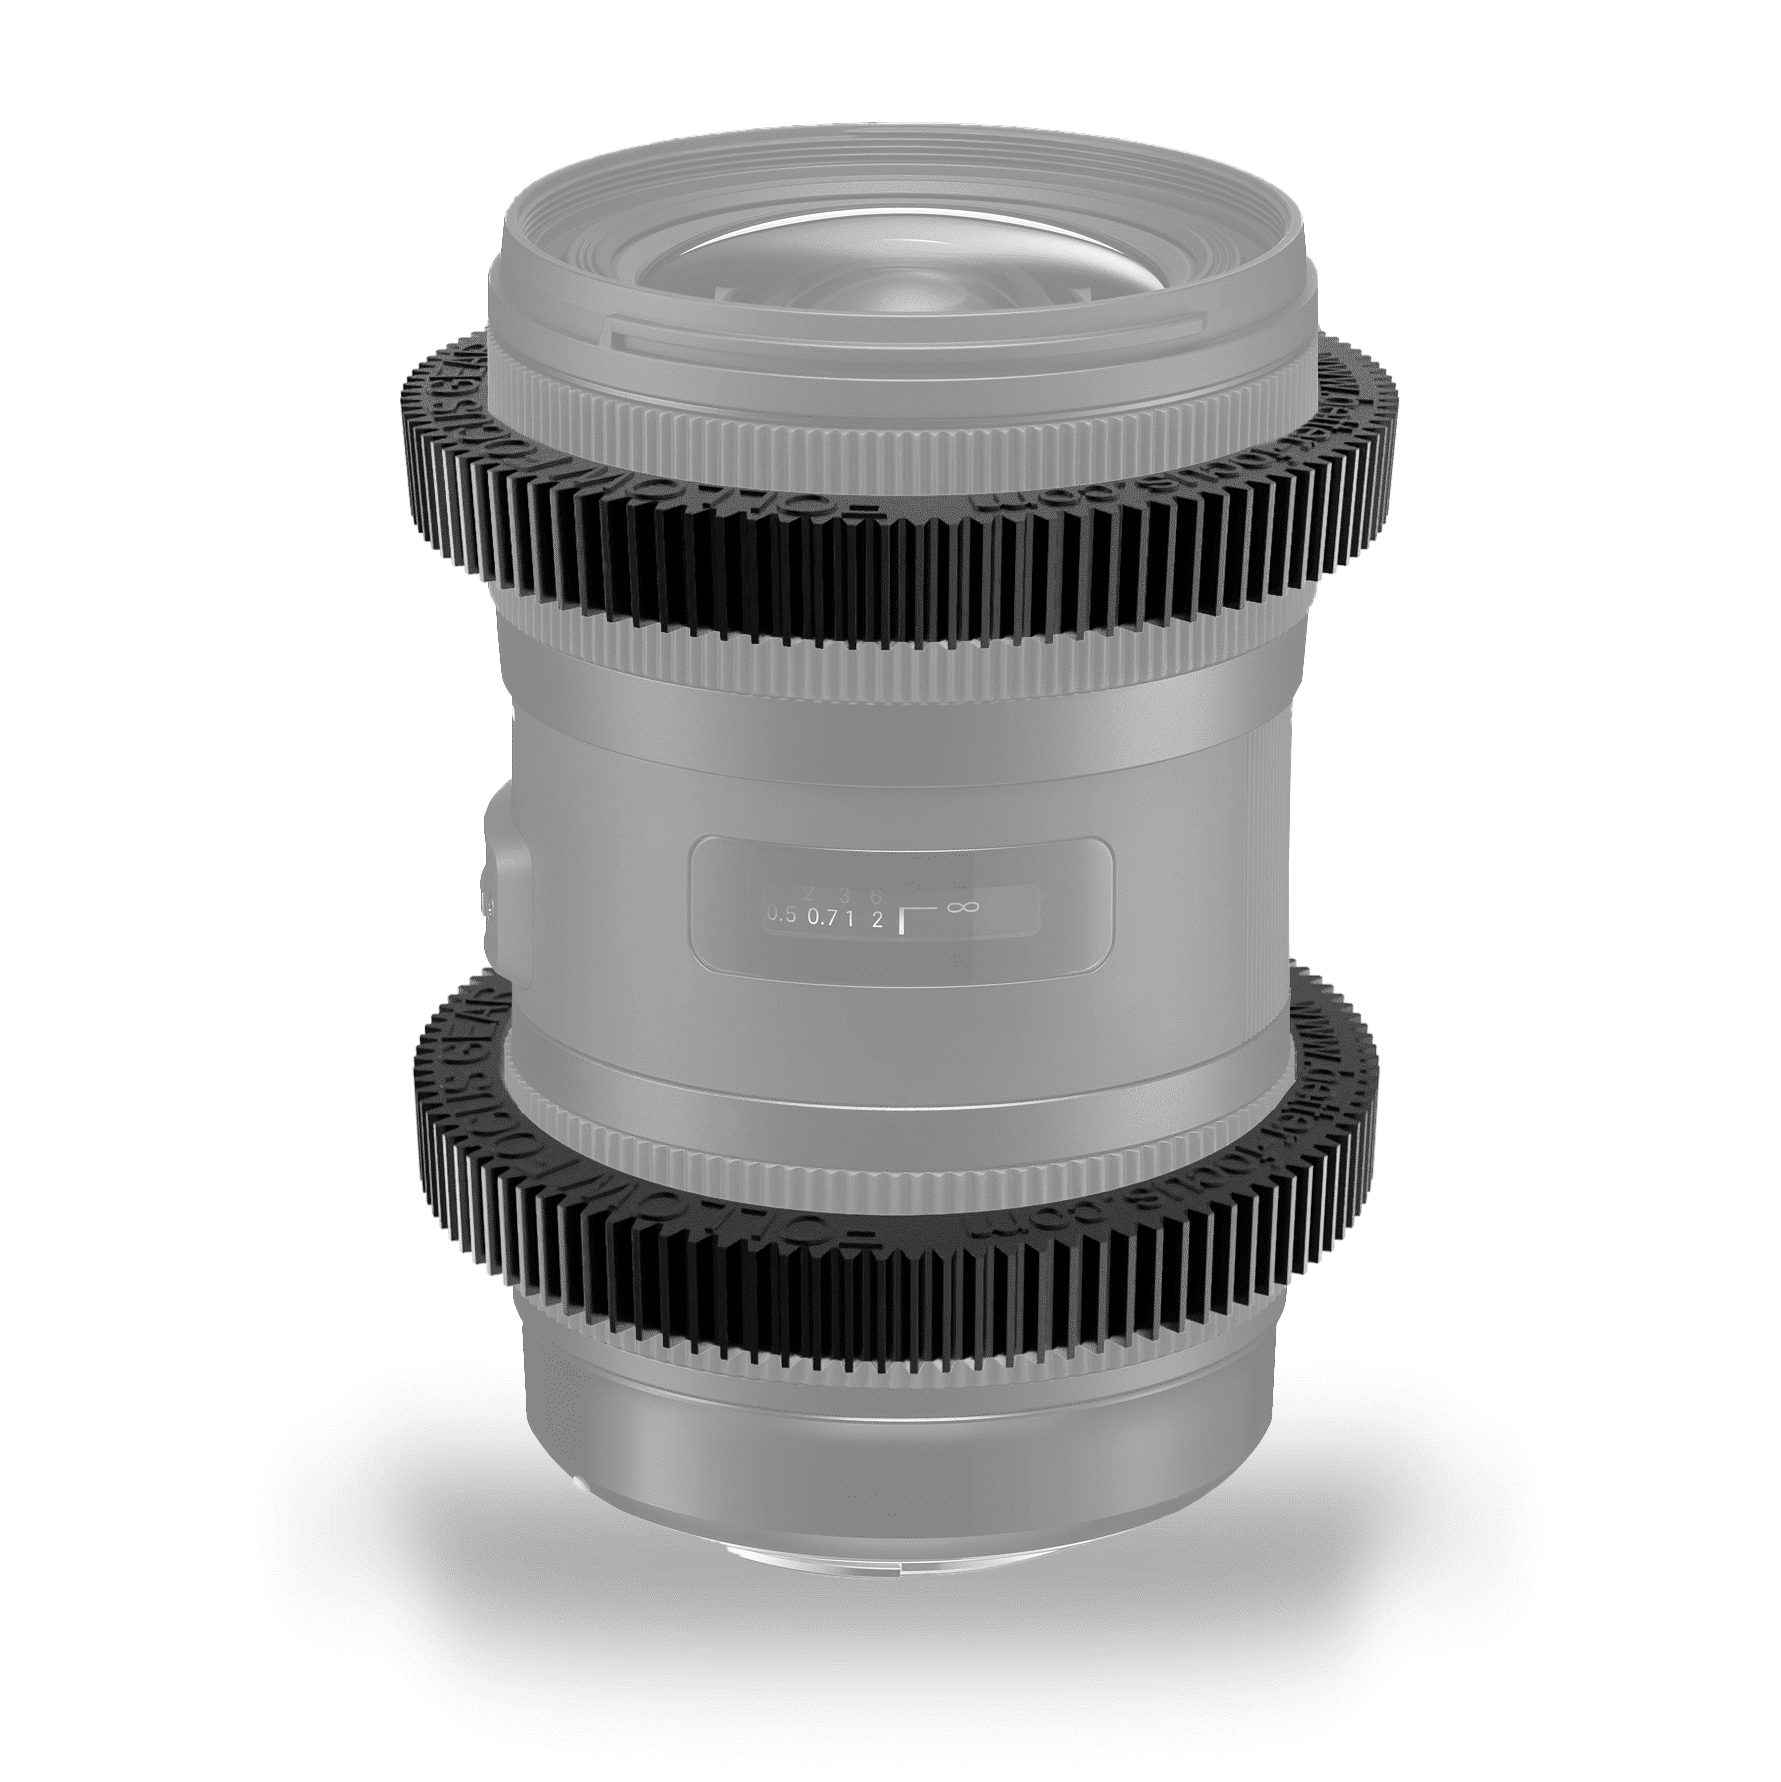 Follow Focus Ring for CANON EF 16-35MM F2.8 L SERIES USM I lens